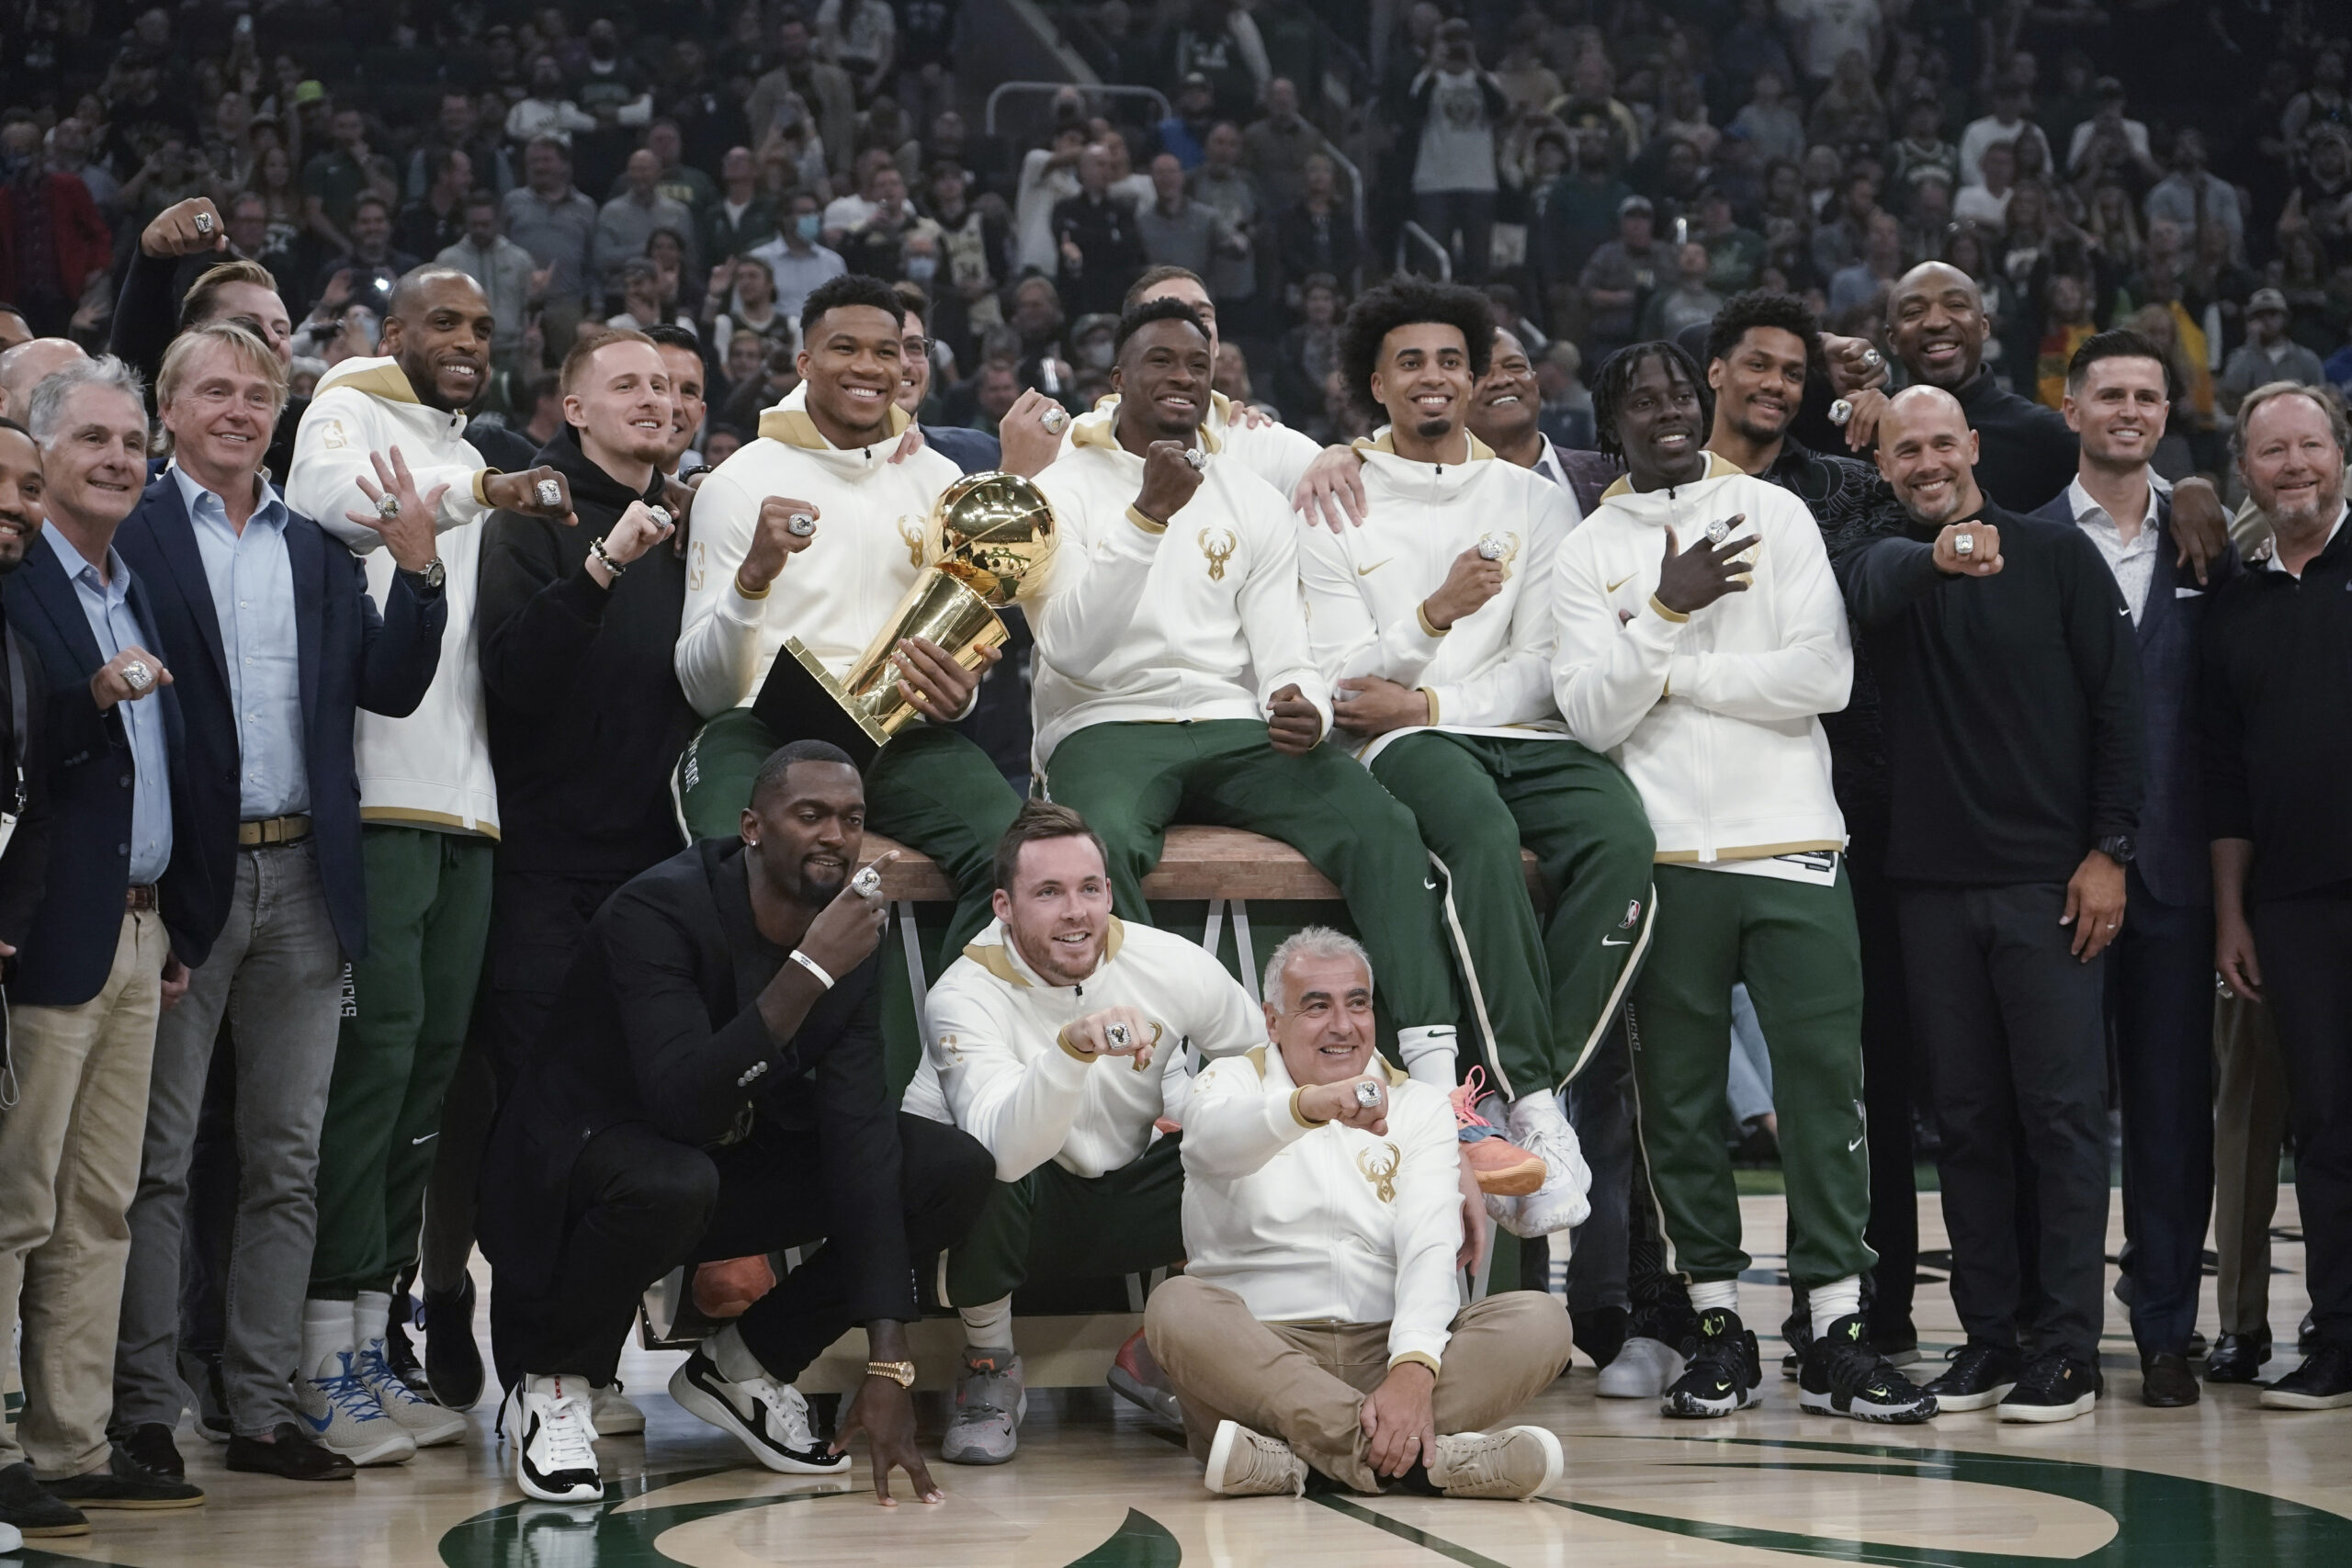 Milwaukee Bucks owners and players display their championship rings before a NBA basketball game